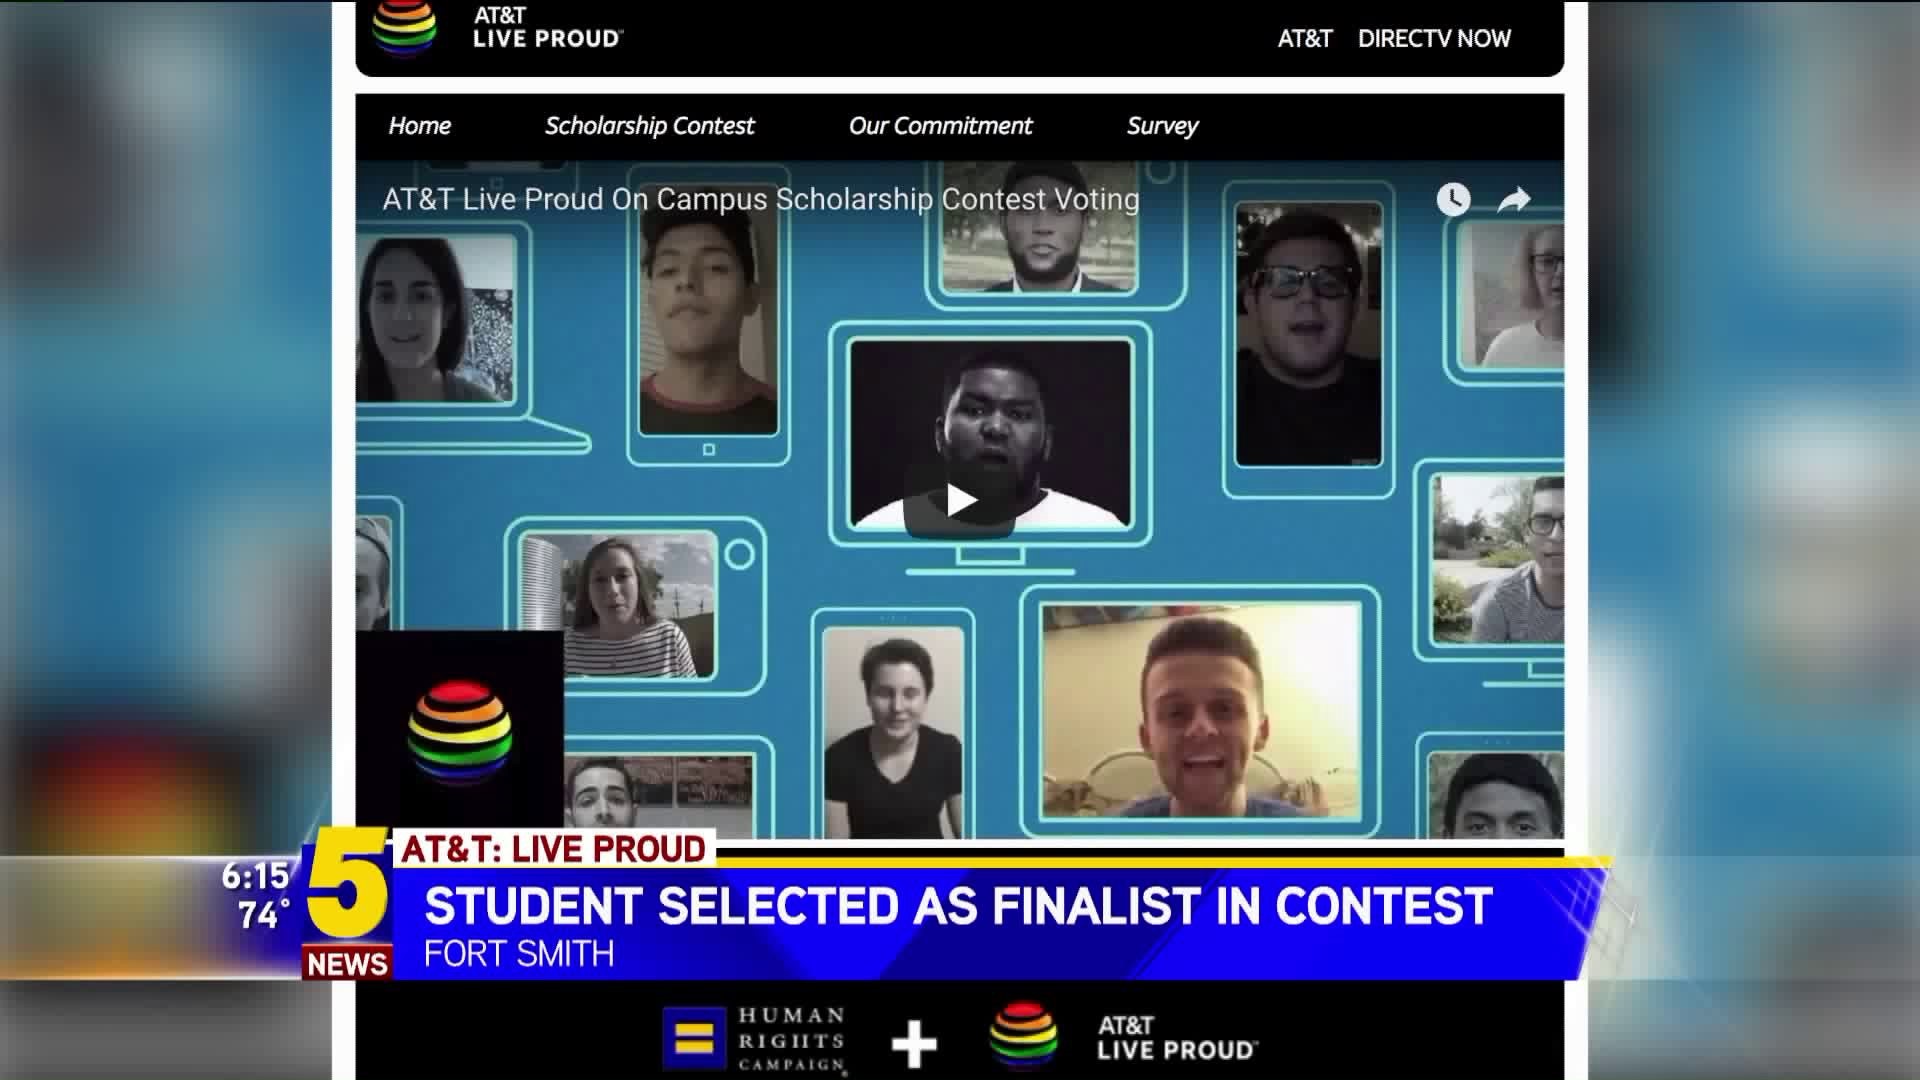 Student Selected As Finalist In AT&T Contest